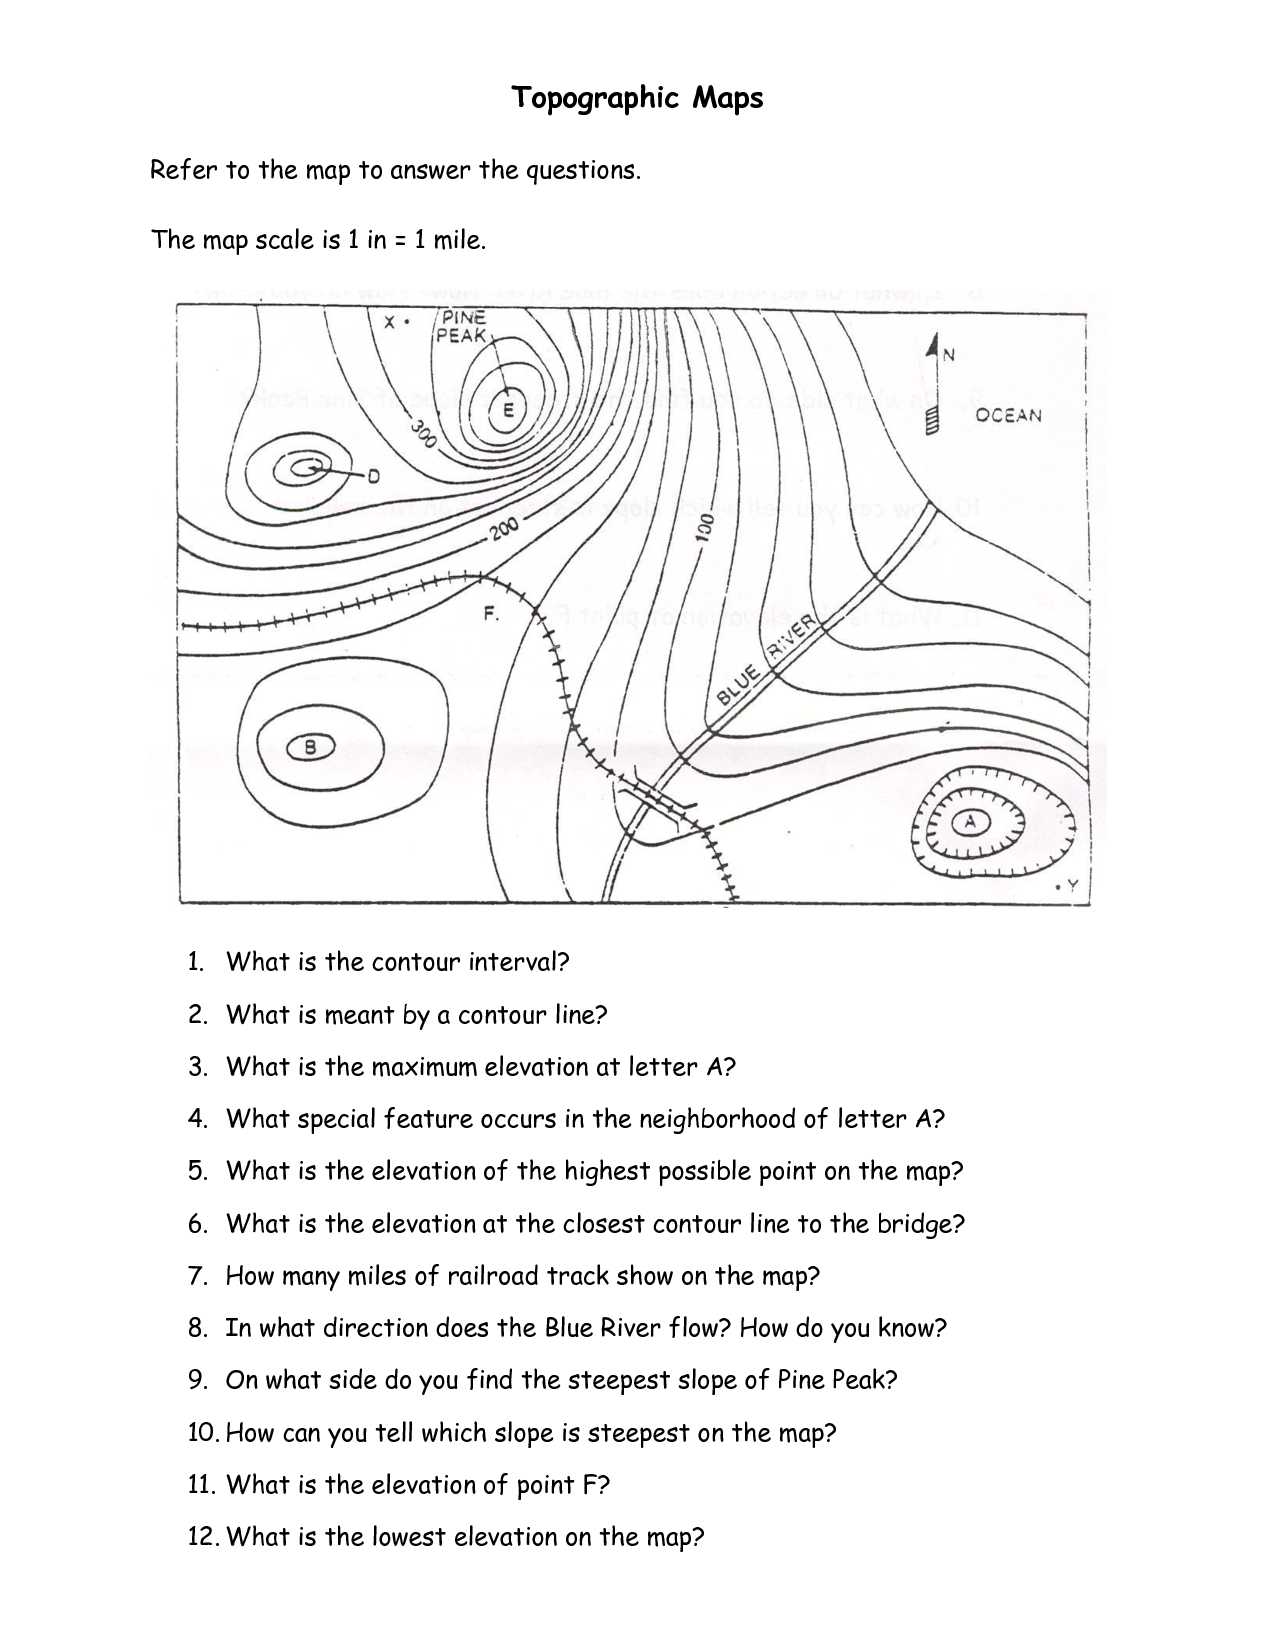 Plate Tectonics Worksheet Answer Key as Well as topographic Map Reading Worksheet Answers topography